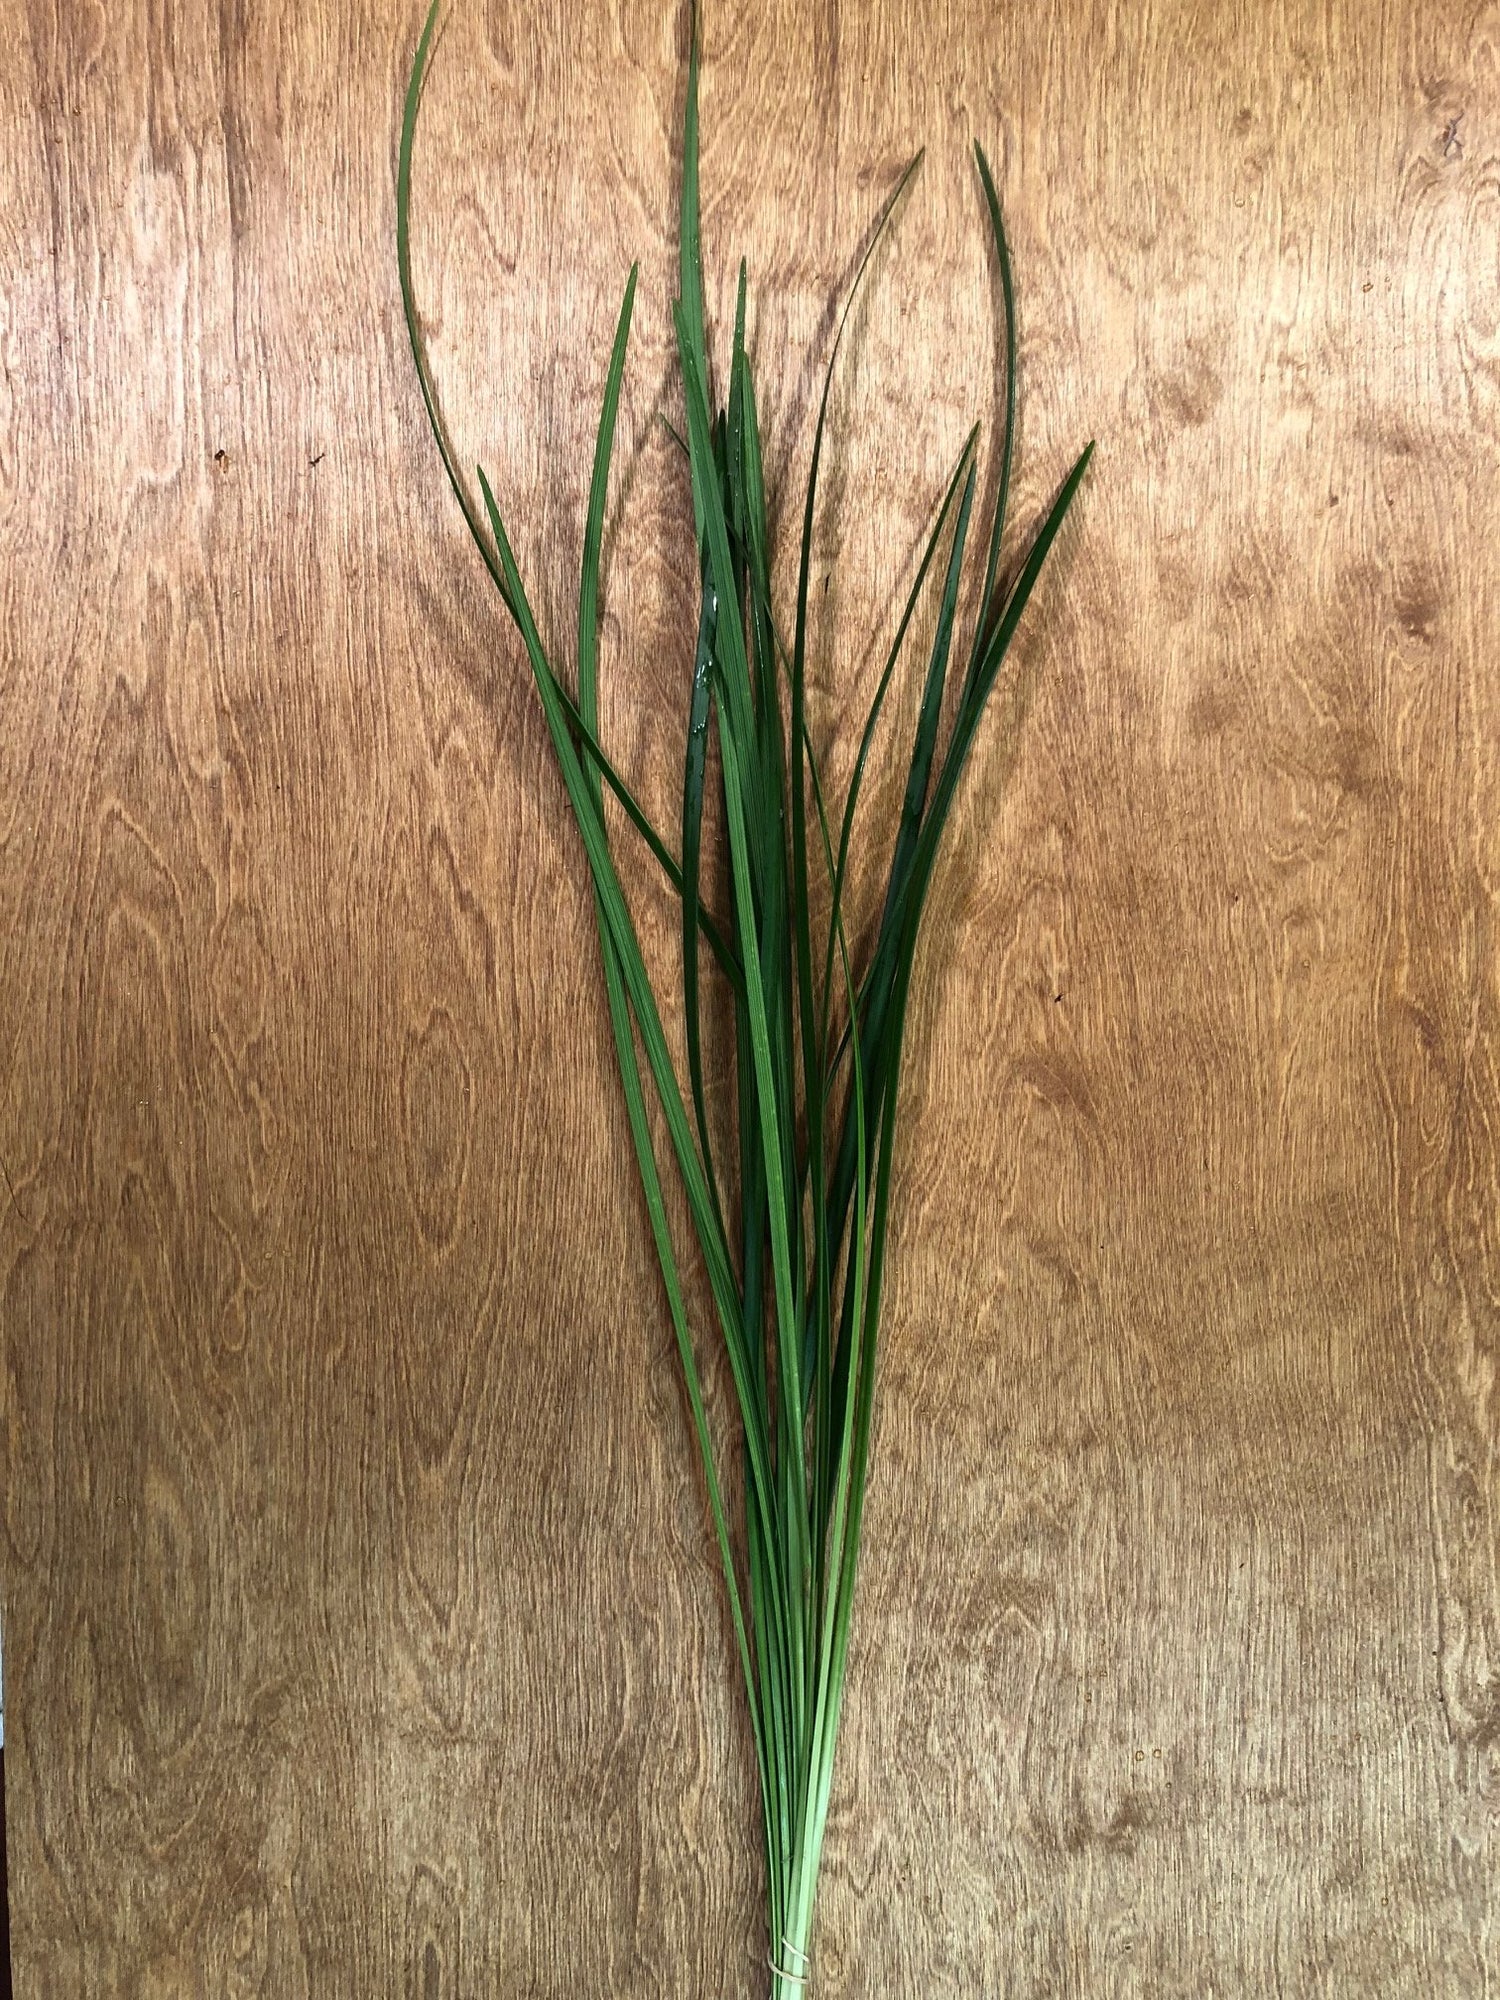 Green Ribbon (Lilly Grass) Bunches